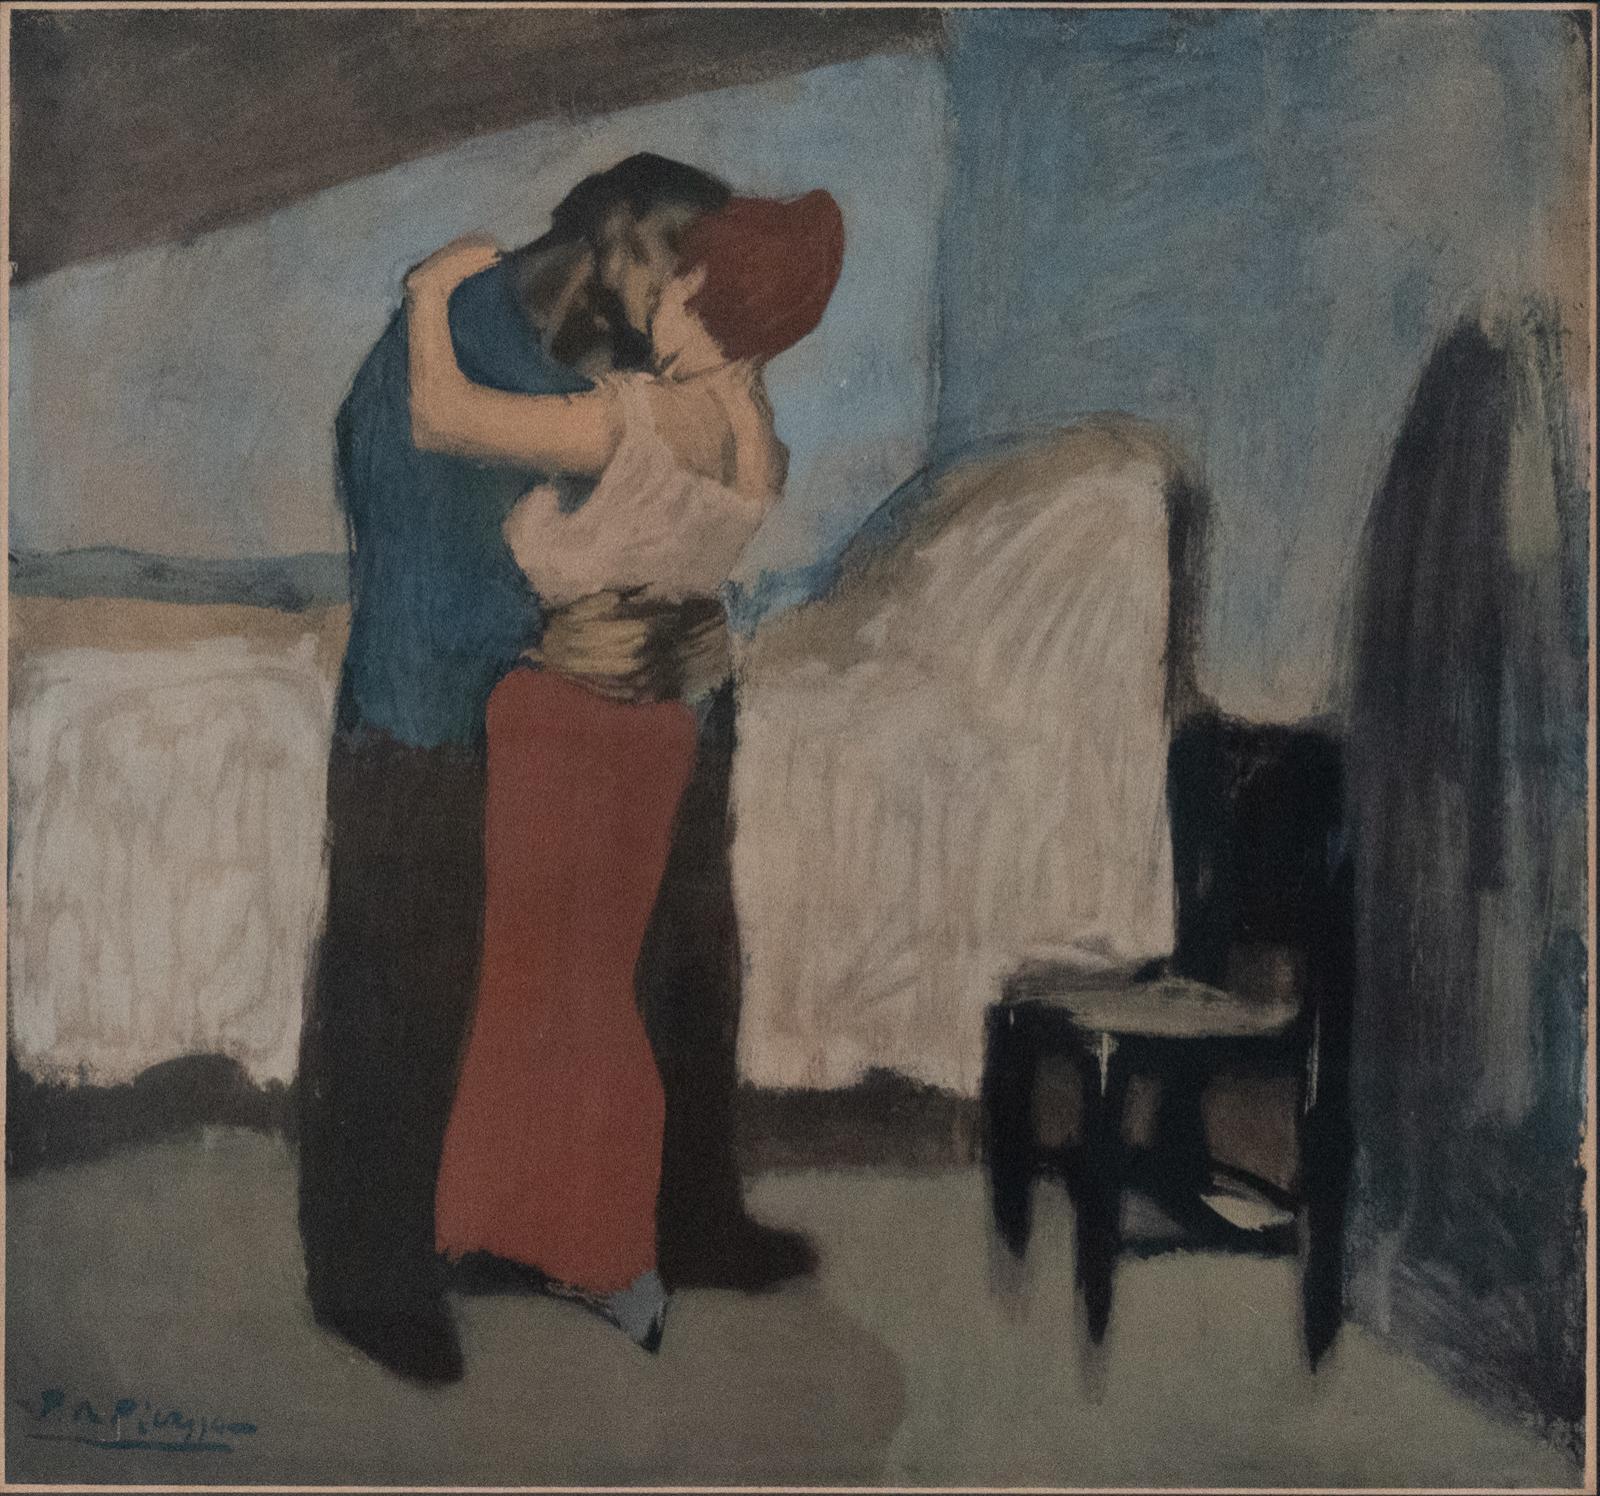 After Pablo Picasso (1881-1973)?The Embrace, offset lithograph in colours, on watermarked Arches paper, an impression aside from the standard edition of 125, published by Guy Spitzer, Paris, with his blindstamp, paper sheet trimmed – half Spitzer